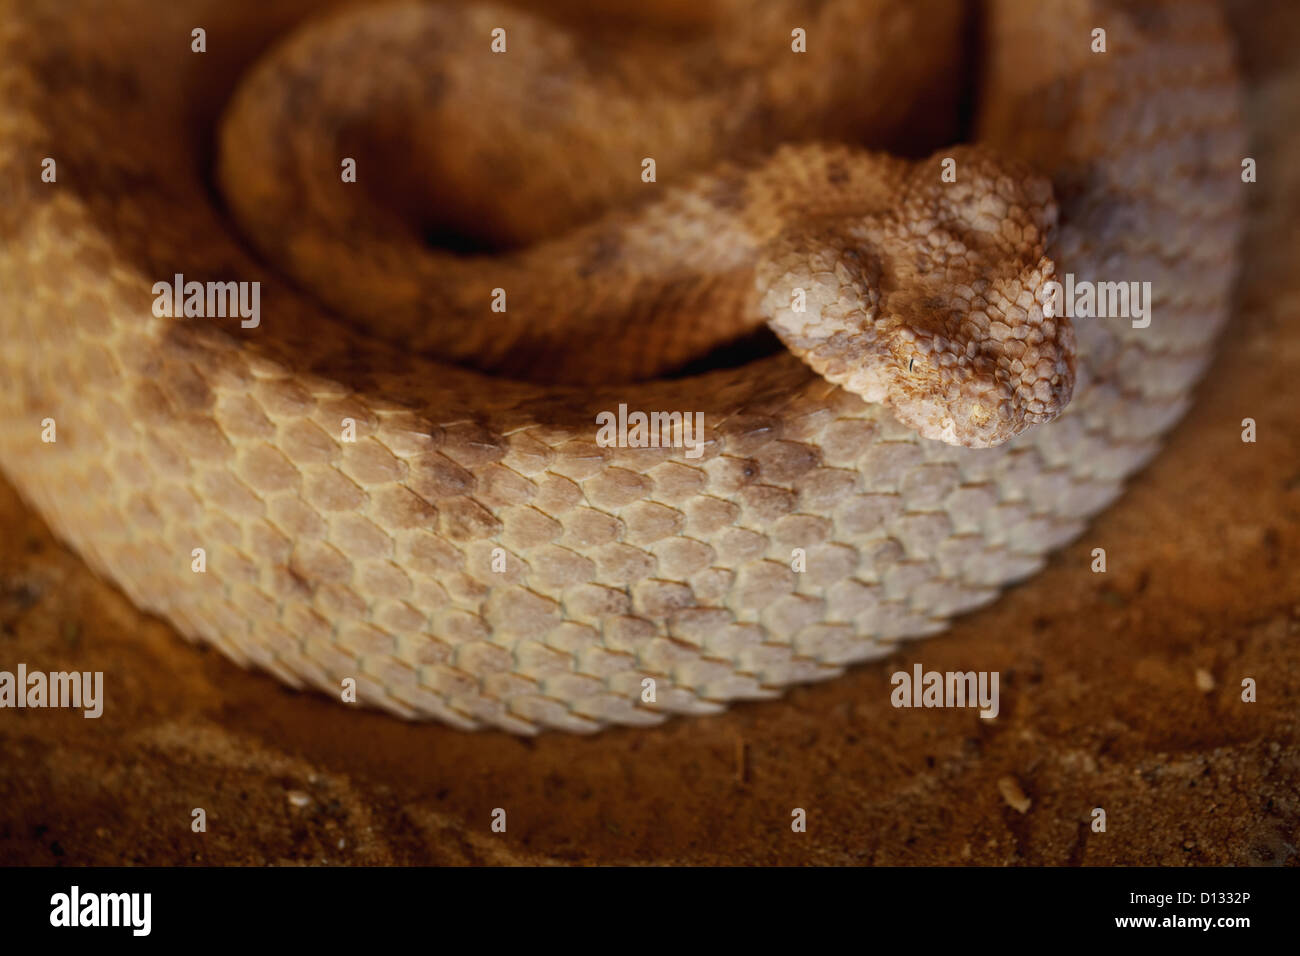 High Angle View Of A Viper Snake; Israel Stock Photo